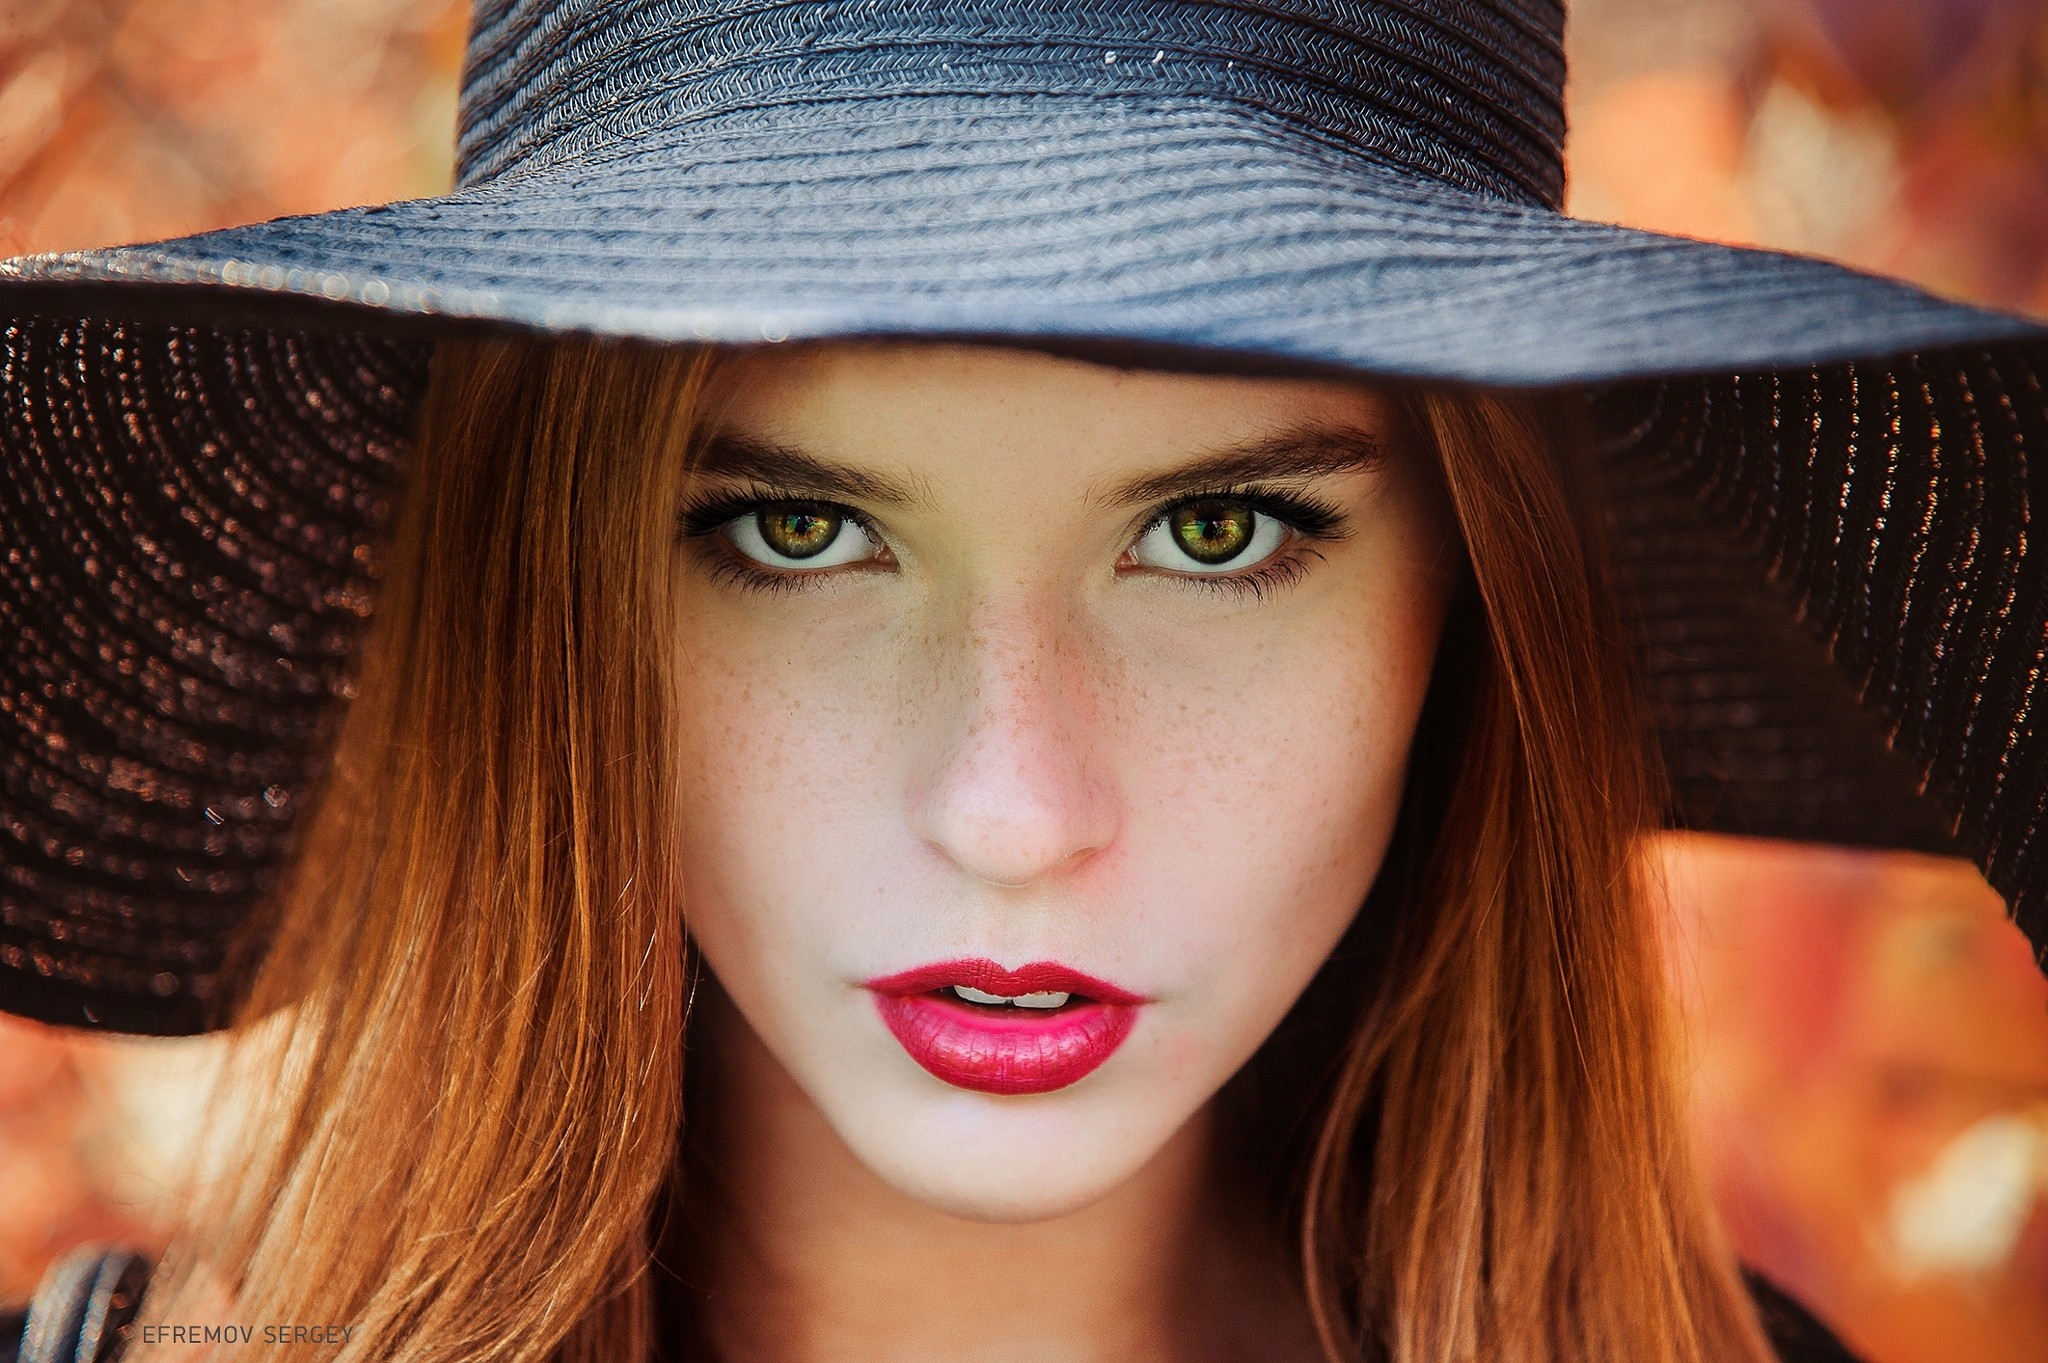 People 2048x1363 women hat face portrait freckles red lipstick depth of field Sergey Efremov millinery hazel eyes looking at viewer redhead long hair straight hair black hat Alexandra Aleksandra makeup closeup open mouth women with hats watermarked